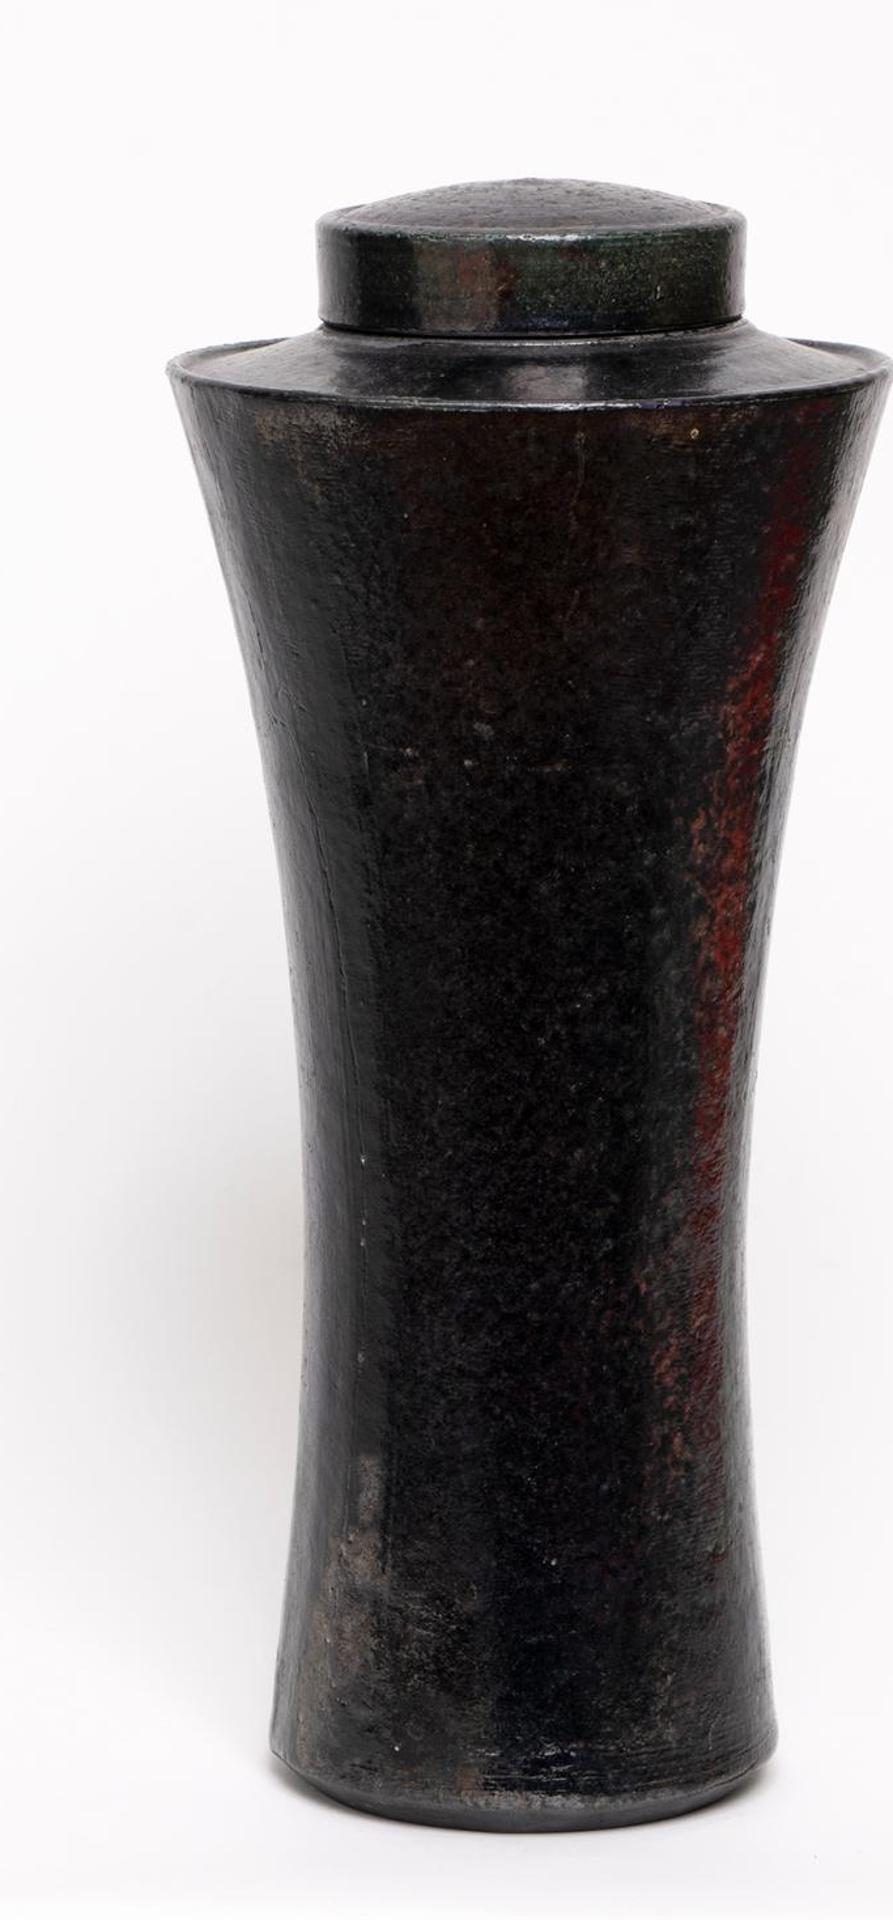 Donovan T. Chester (1940) - Tall Black Vase with Lid